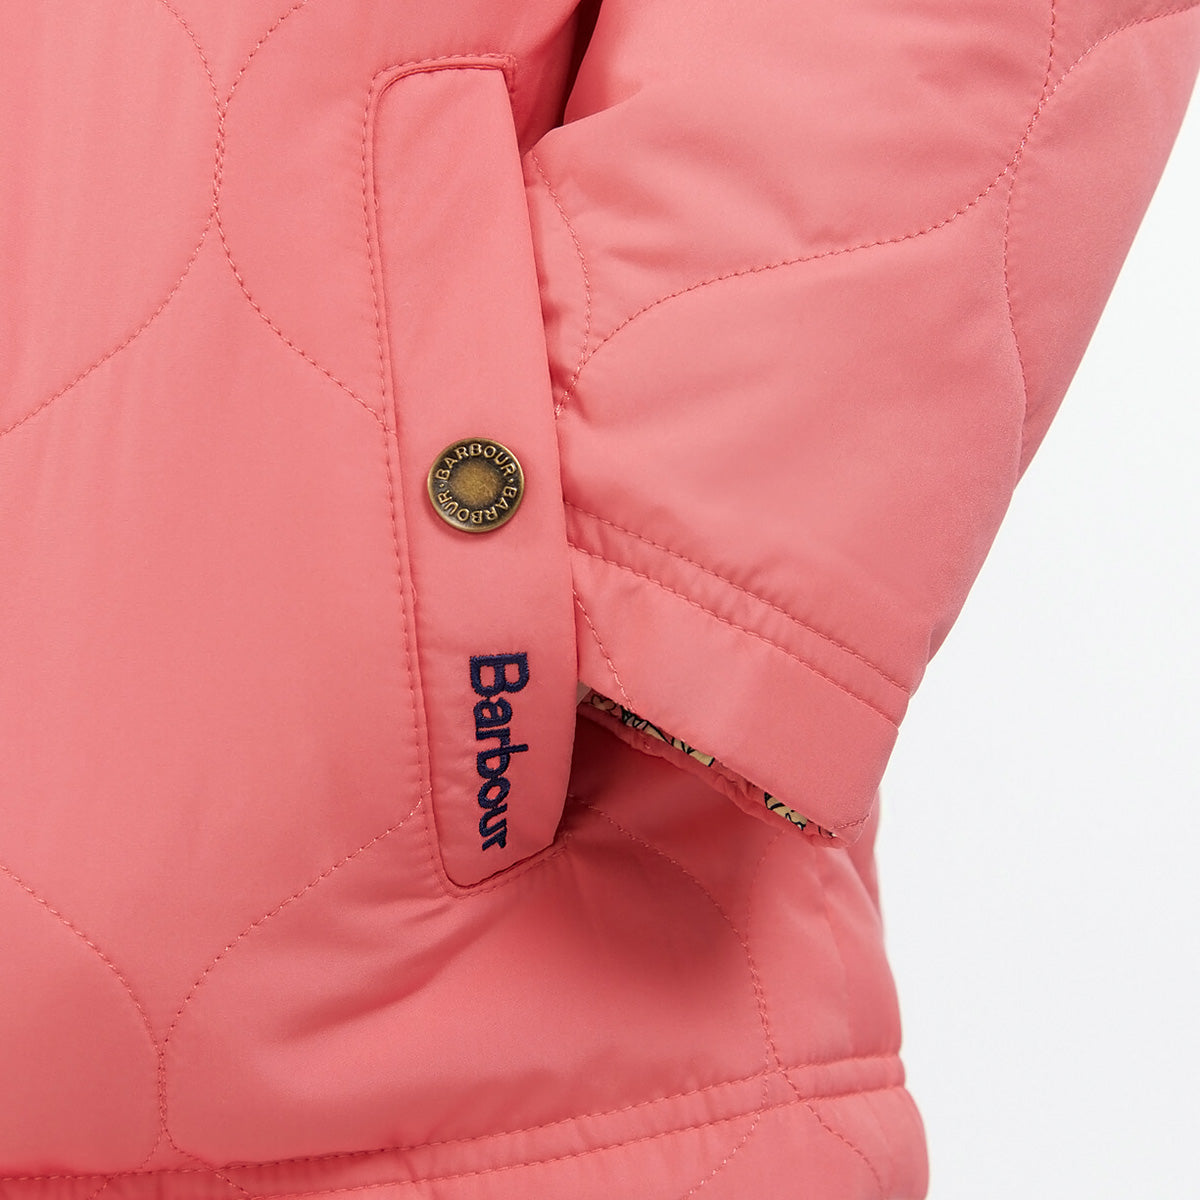 Current Air Women's Reversible Quilted Jacket